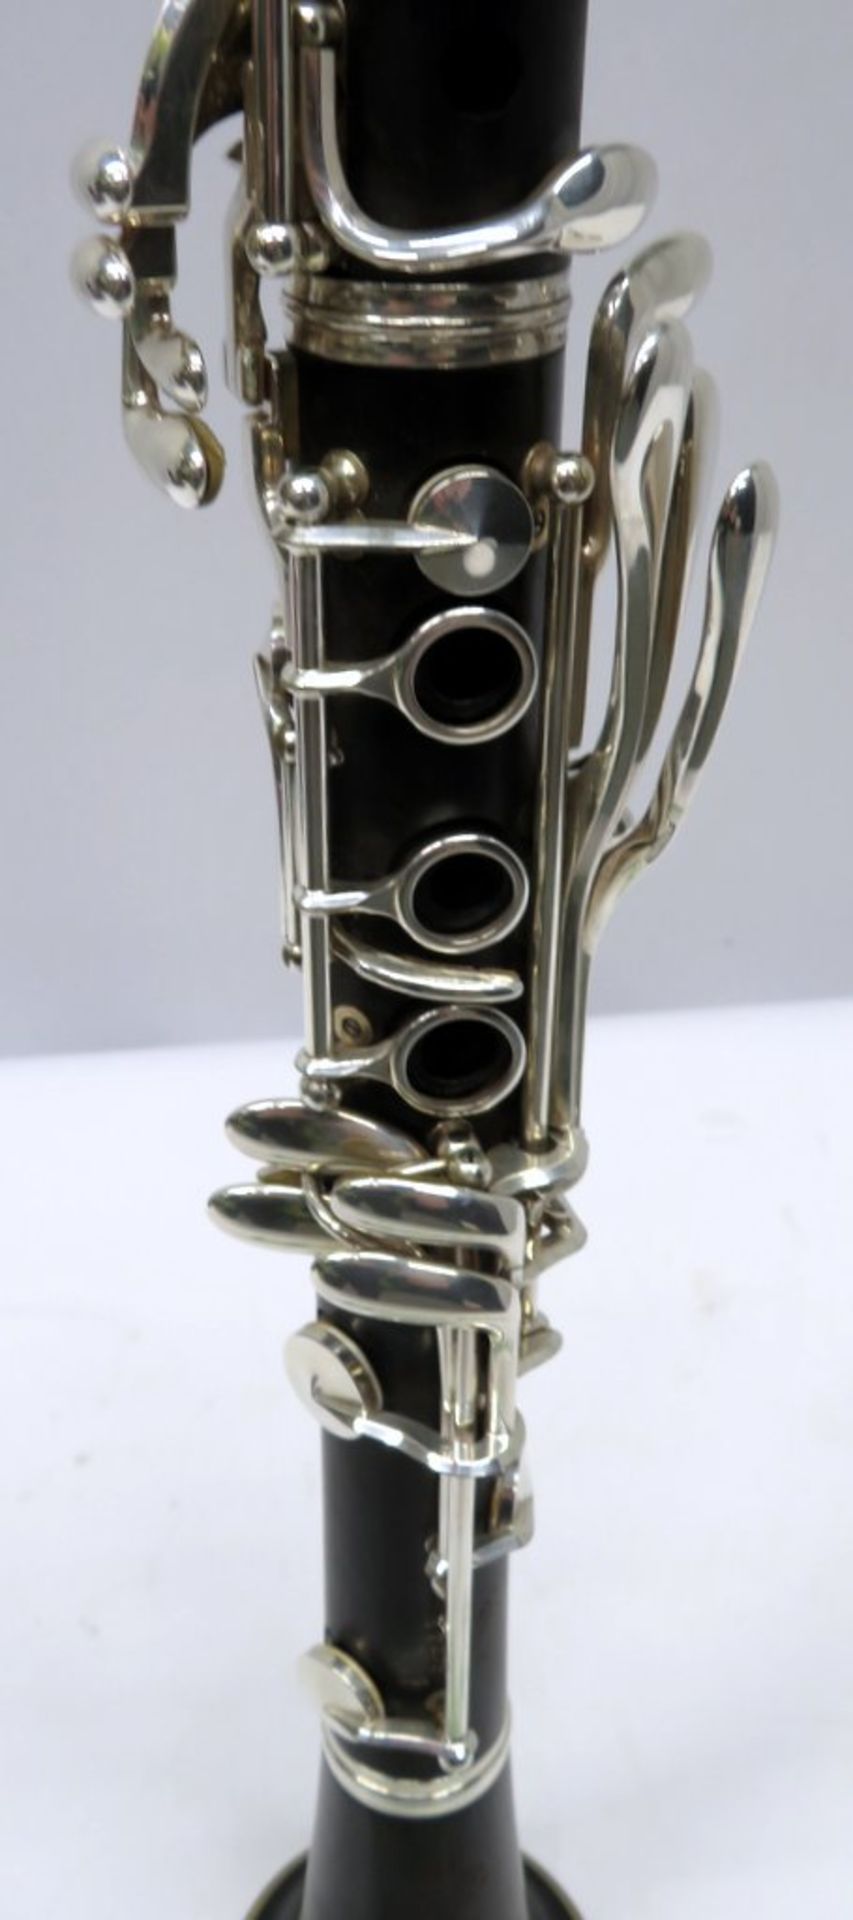 Buffet Crampon Prestige R13 Clarinet Complete With Case. - Image 15 of 18